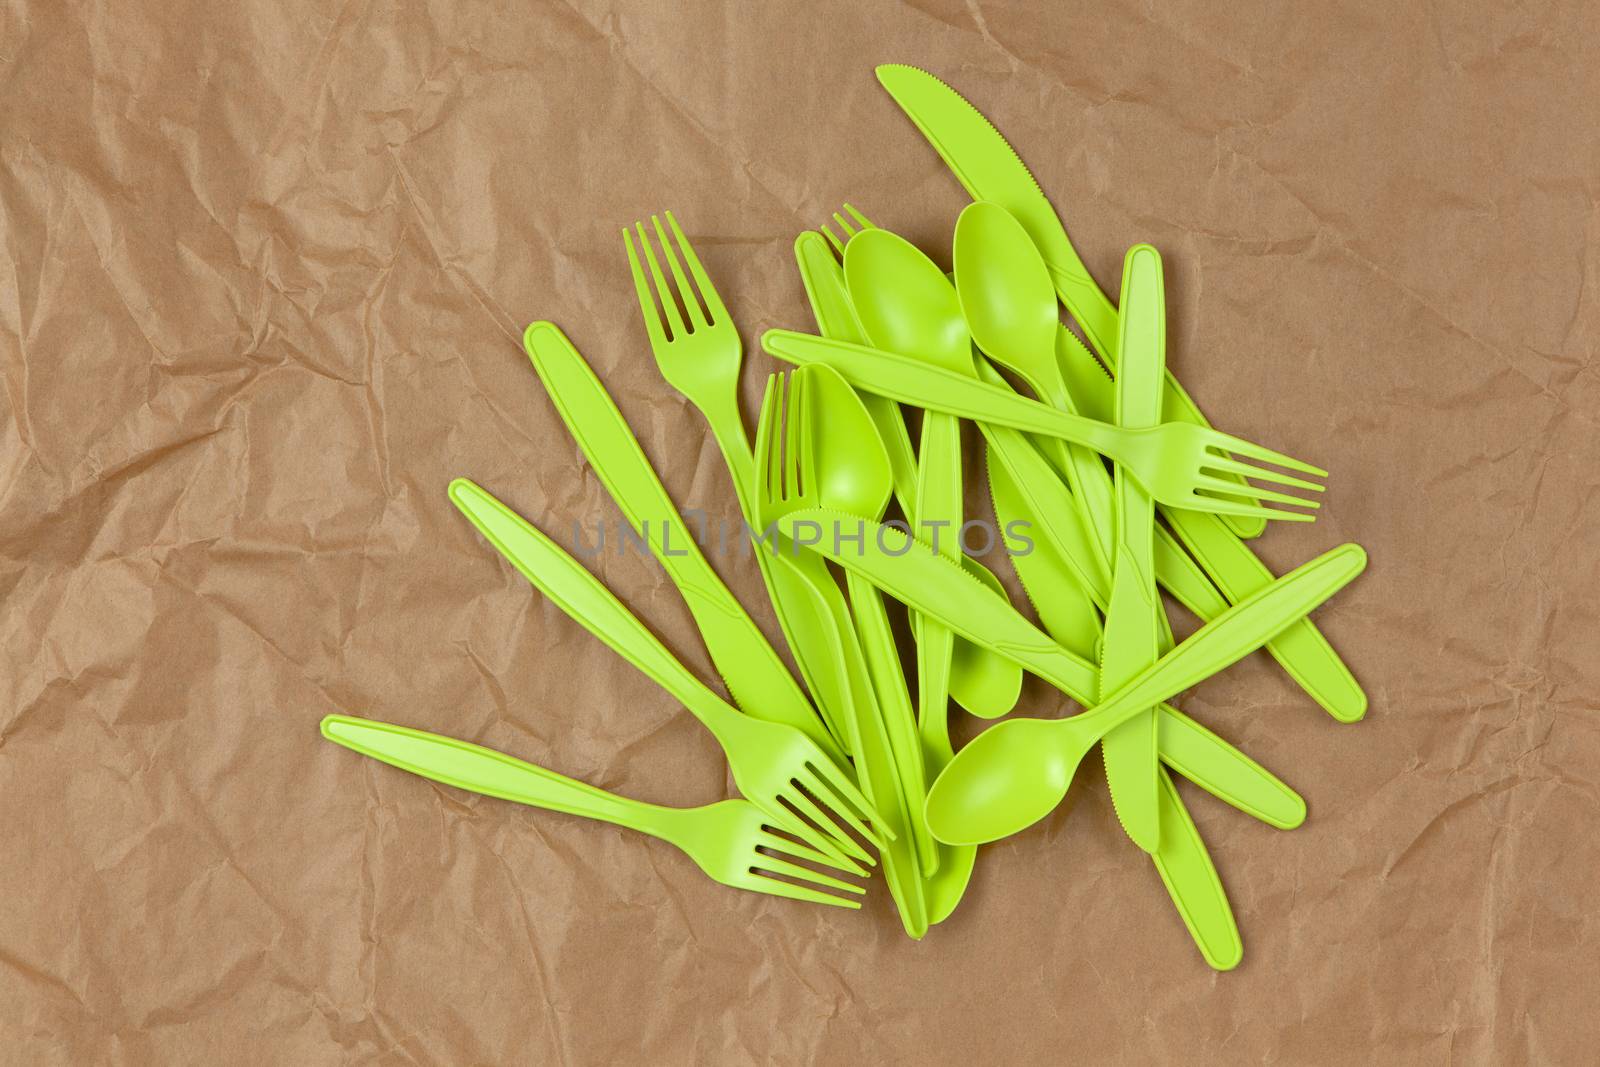 Biodegradable reusable recyclable green forks, spoons, knifes made from corn starch on brown crumpled craft paper. Eco, zero waste, alternative to plastic concept. Flat lay. Horizontal. Close-up.